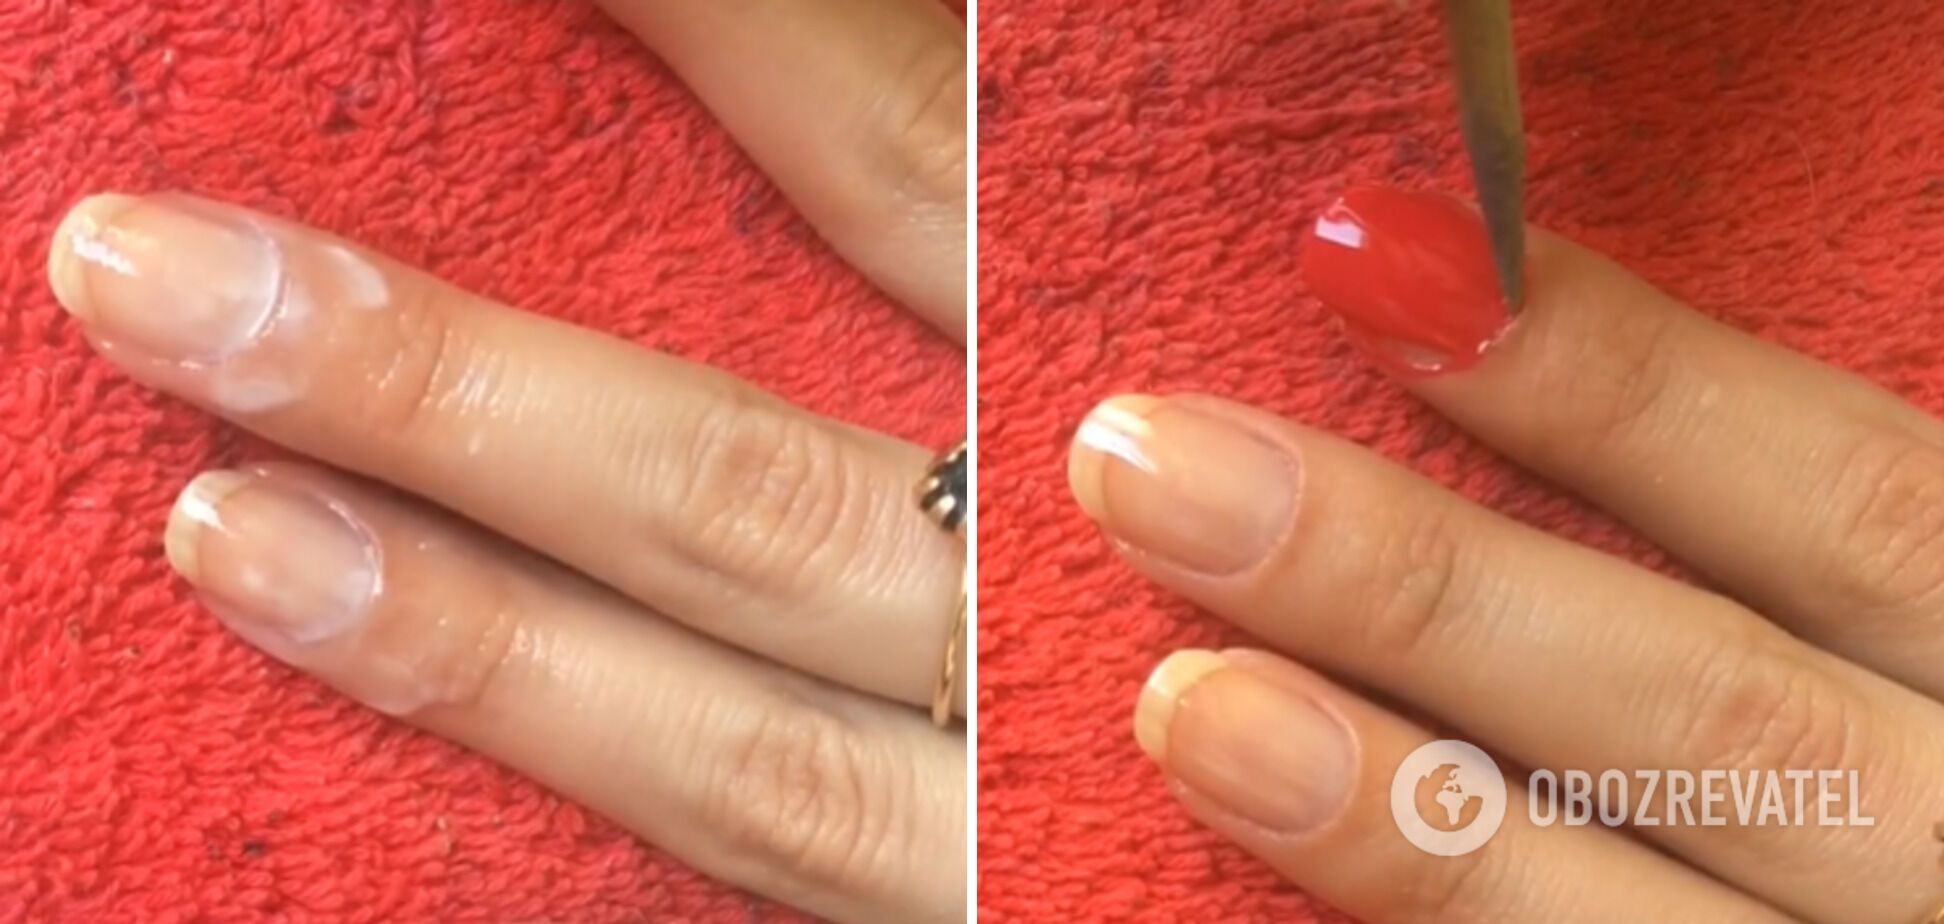 Brazilian manicure is gaining popularity online: what is its peculiarity